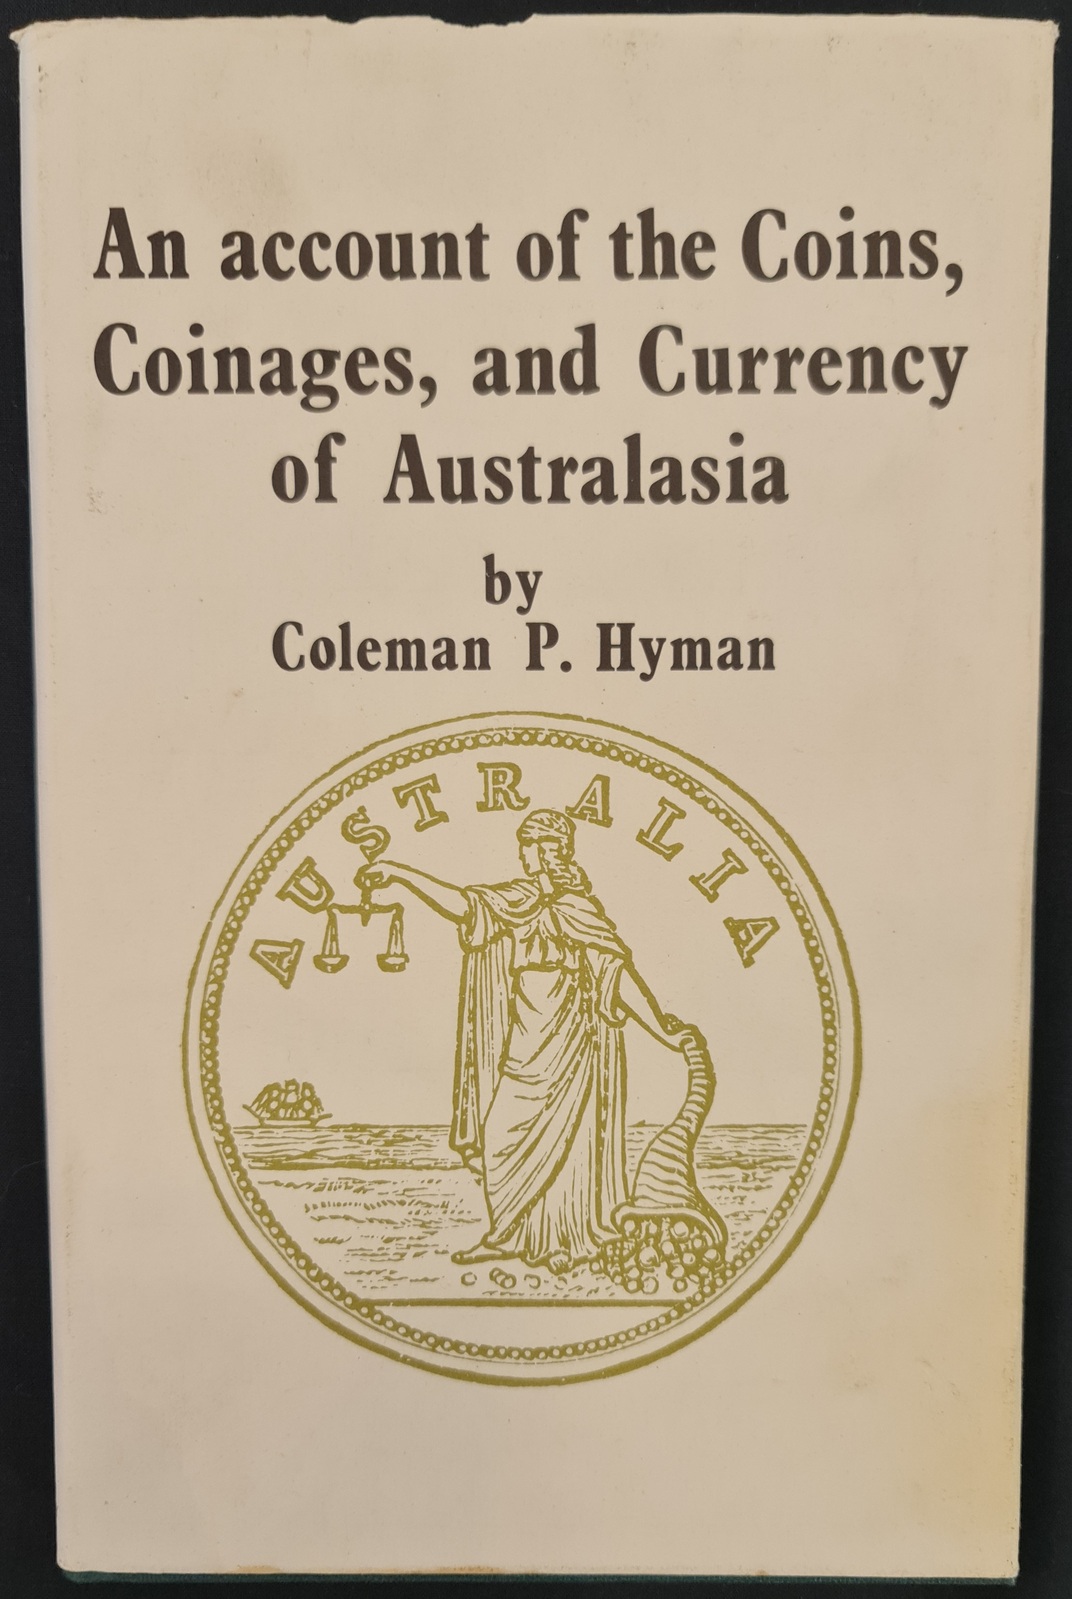 Coins Coinages and Currency Book Coleman P Hyman product image